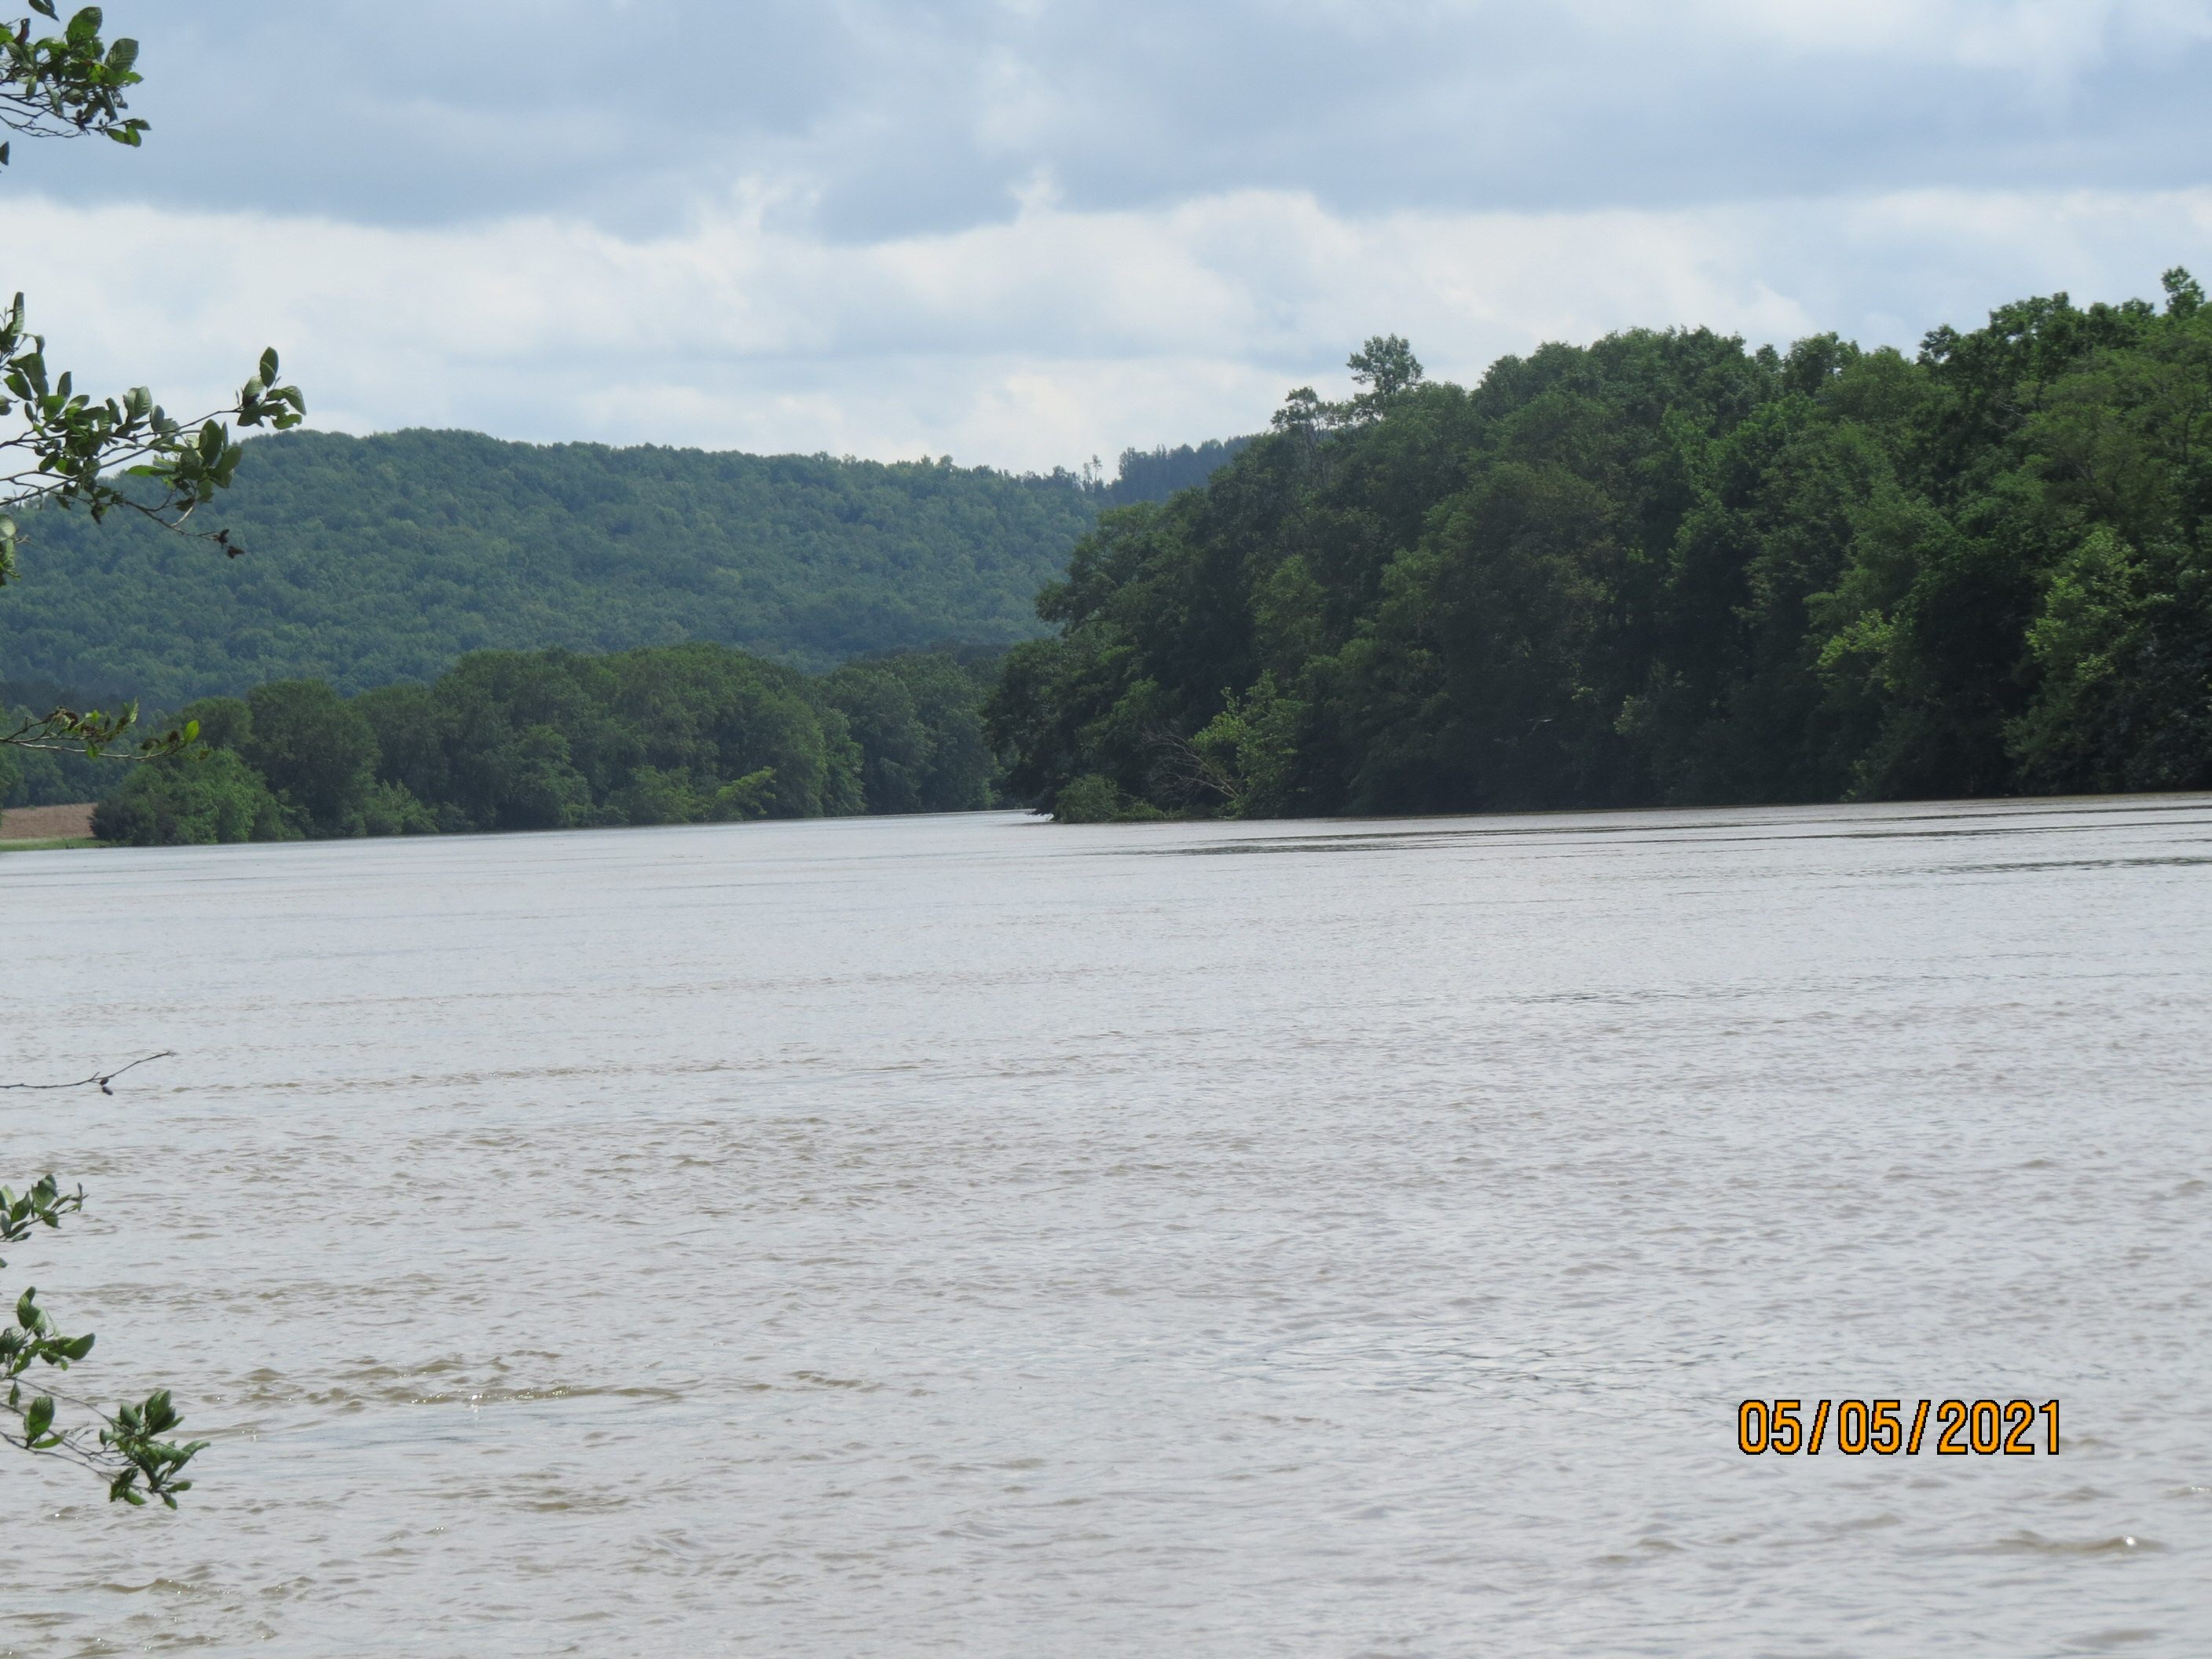 View from the rivers edge.  Looking south down the Coosa  River